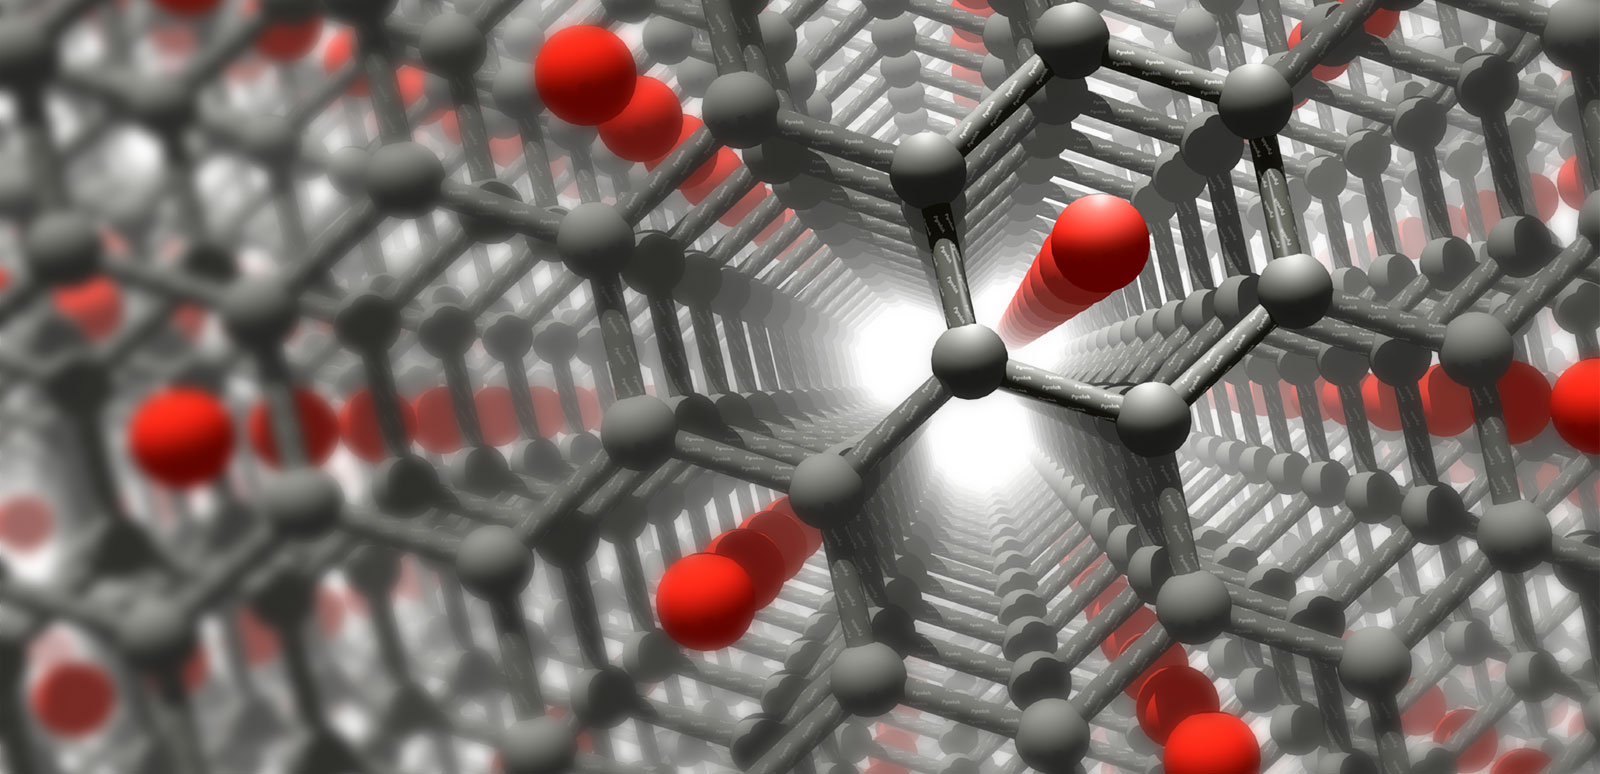 Graphite Anode Materials for Lithium-Ion Batteries Featured